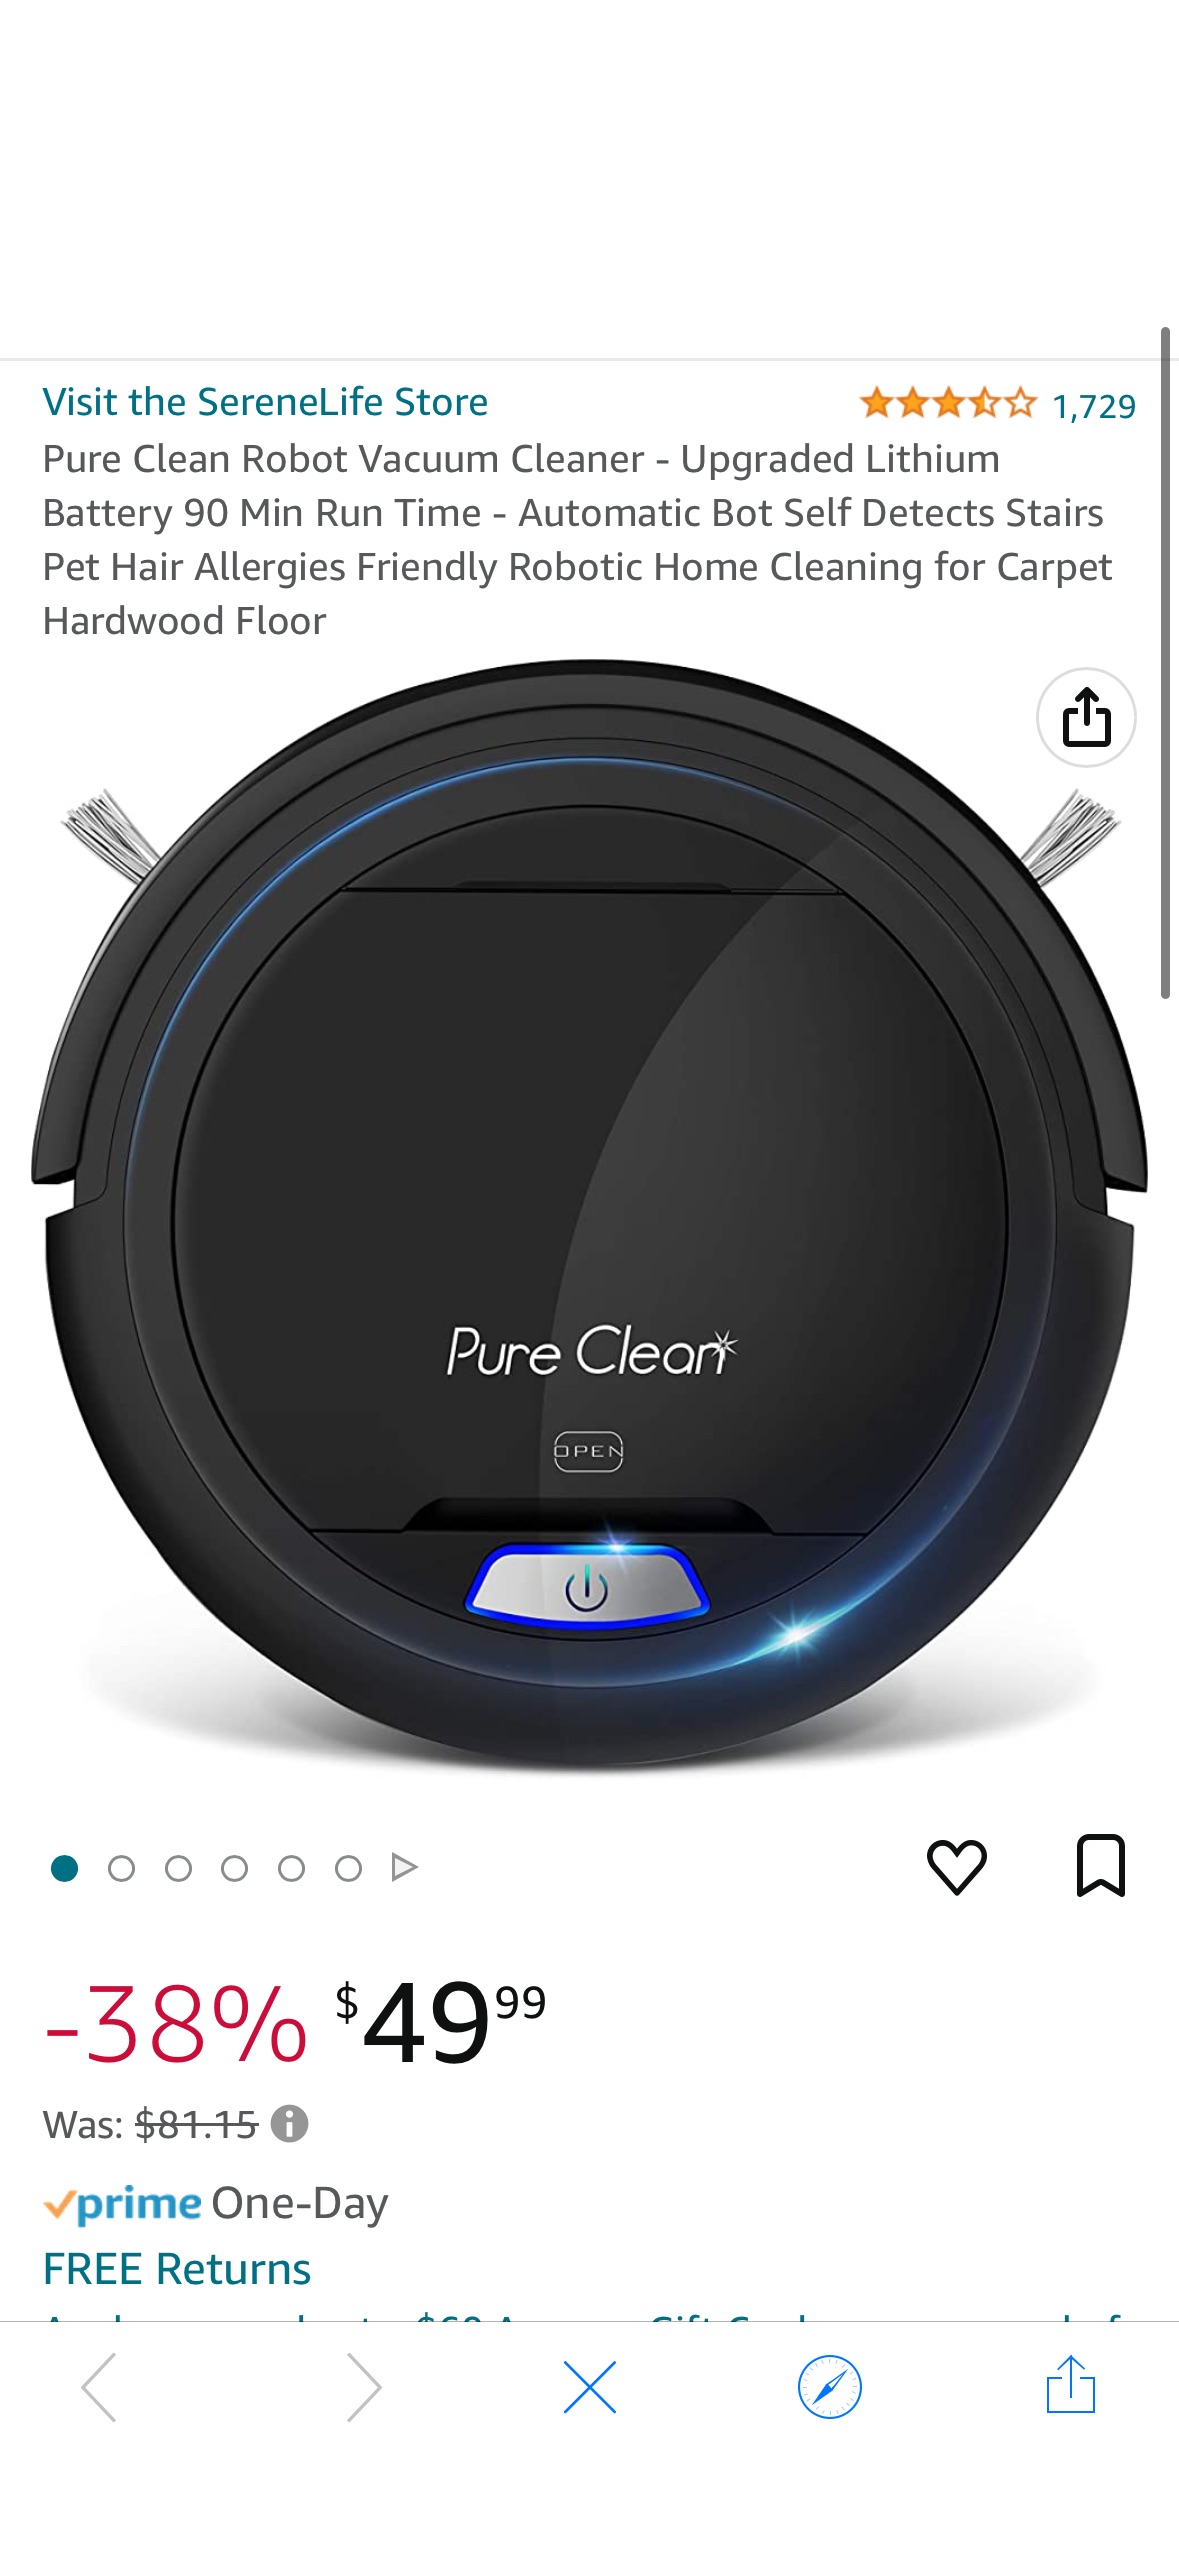 Amazon.com: Pure Clean Robot Vacuum Cleaner - Upgraded Lithium Battery 90 Min Run Time - Automatic Bot Self Detects Stairs Pet Hair